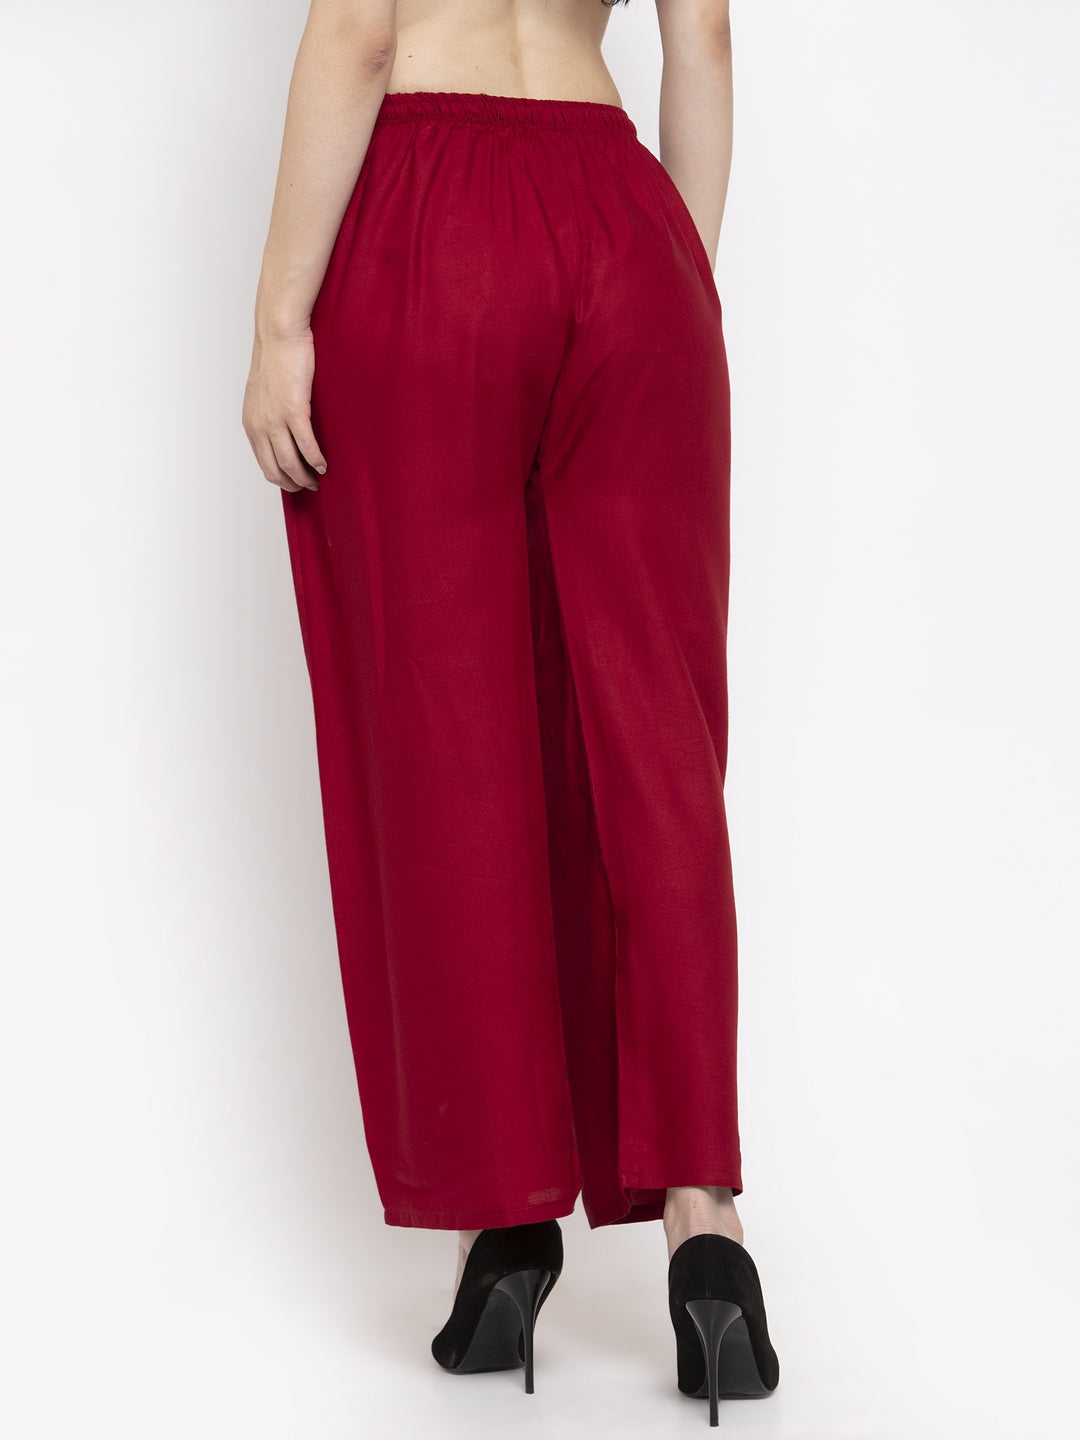 Clora Solid Off-White & Maroon Rayon Palazzo (Pack Of 2)